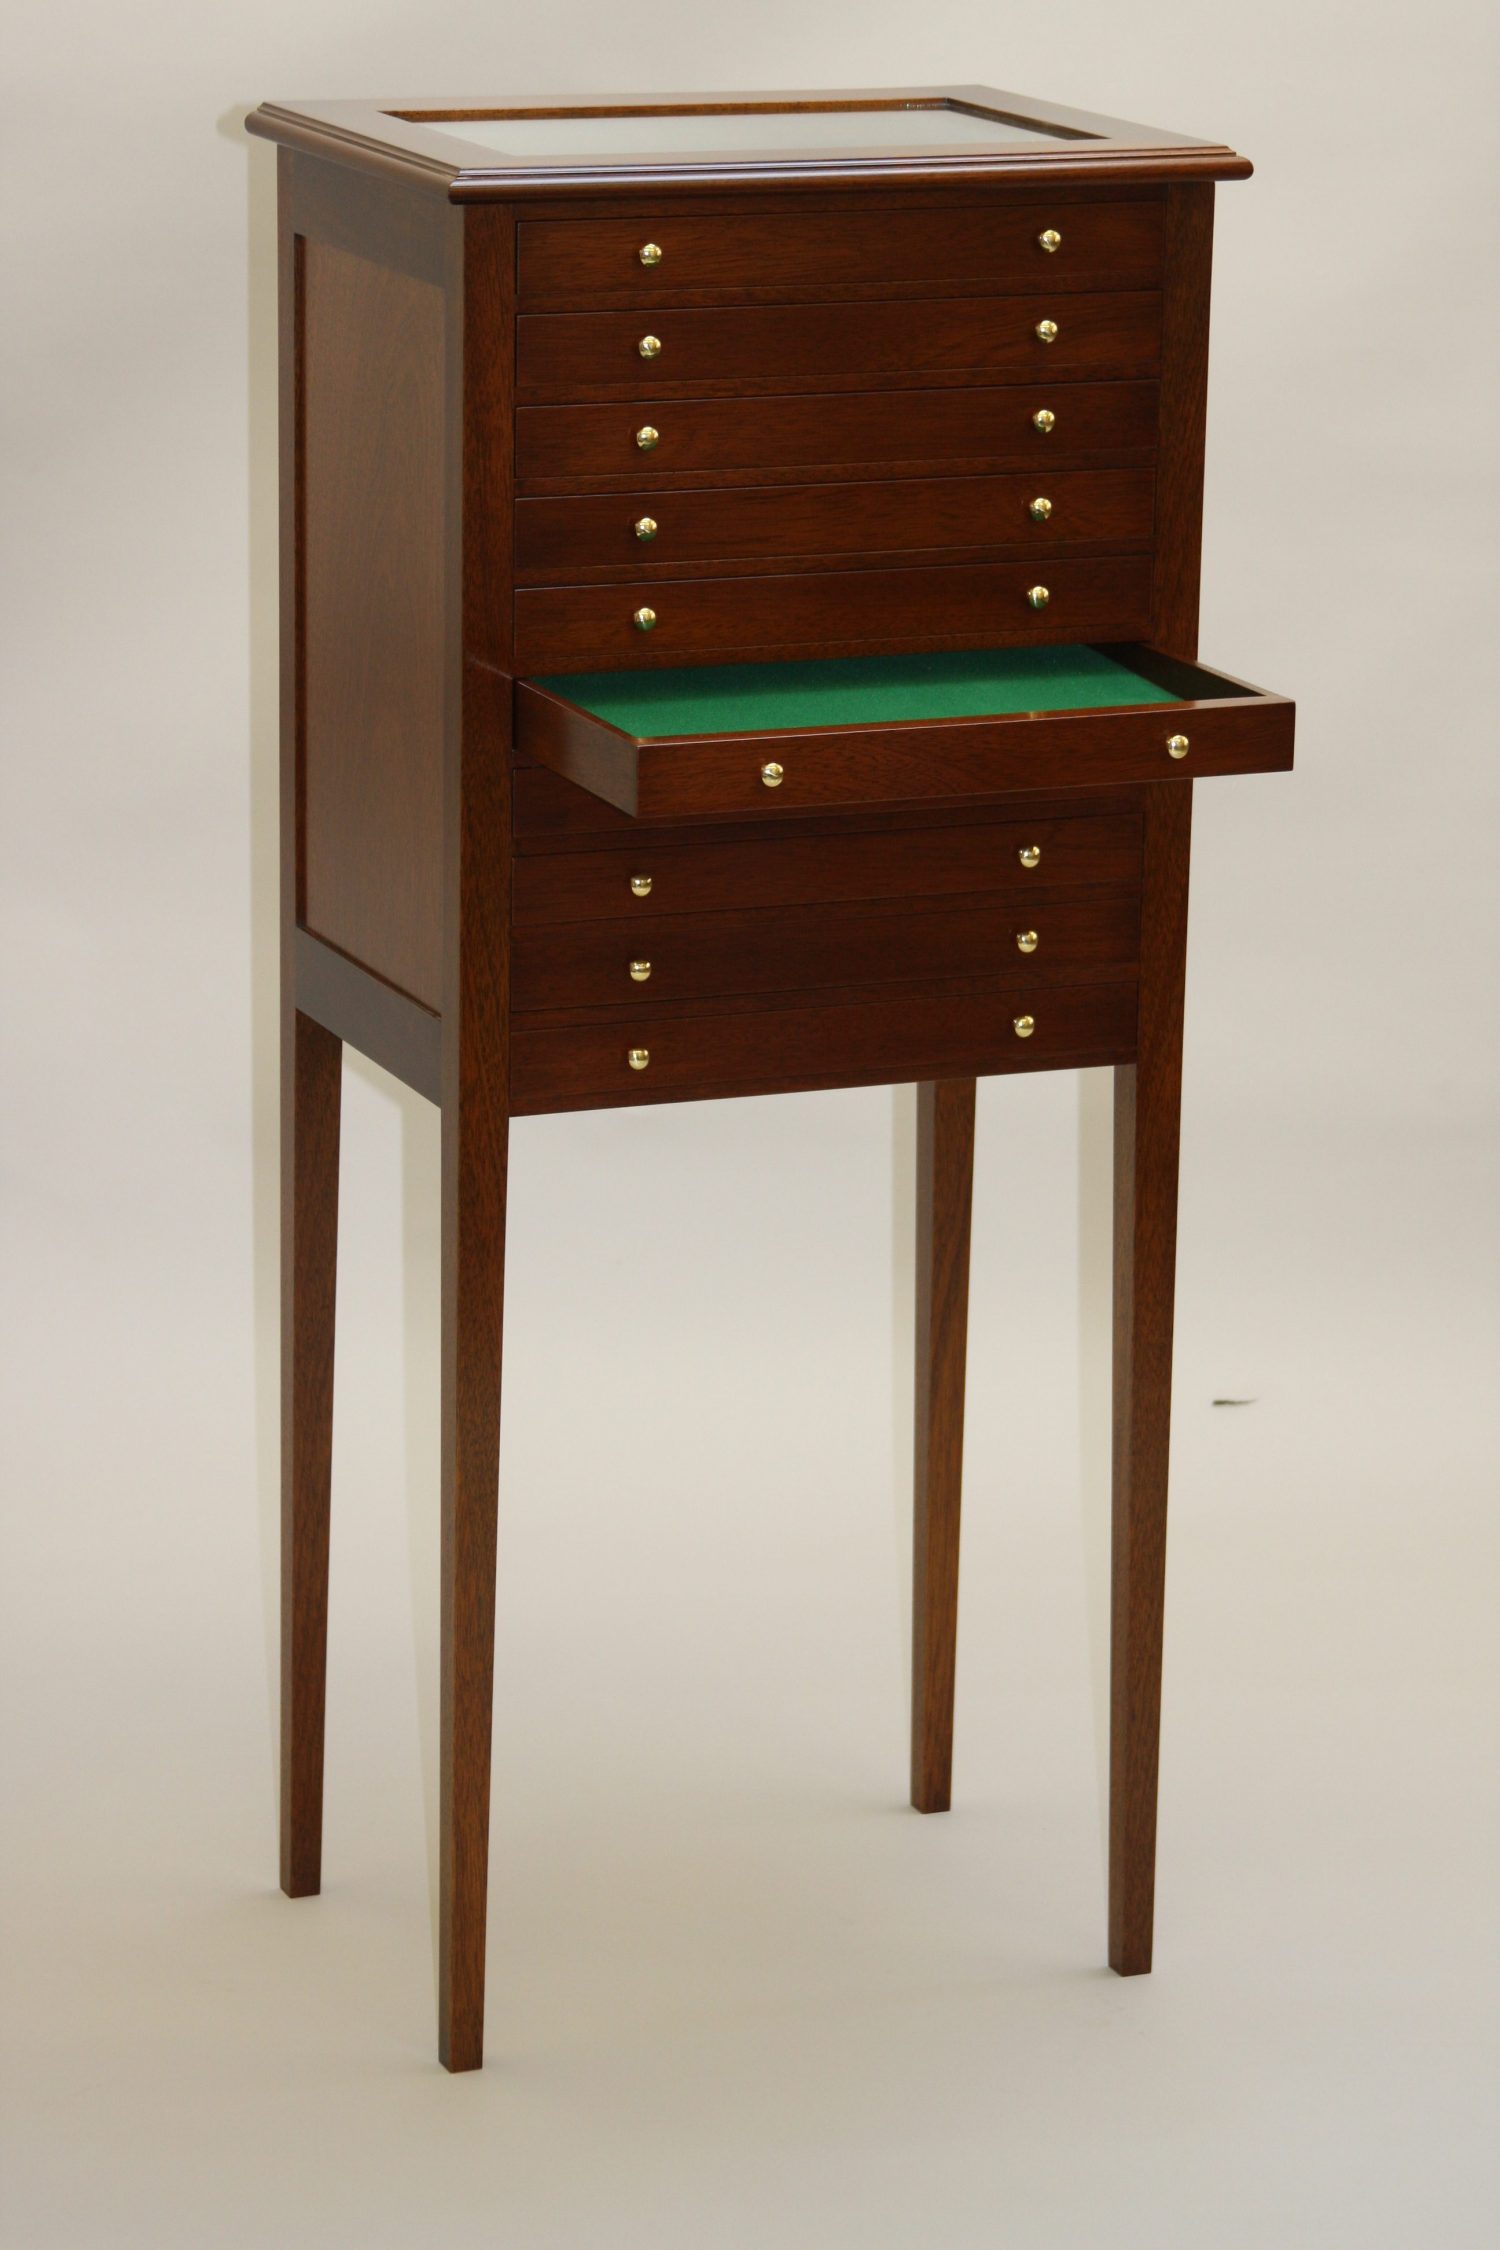 Baize Lined Drawers